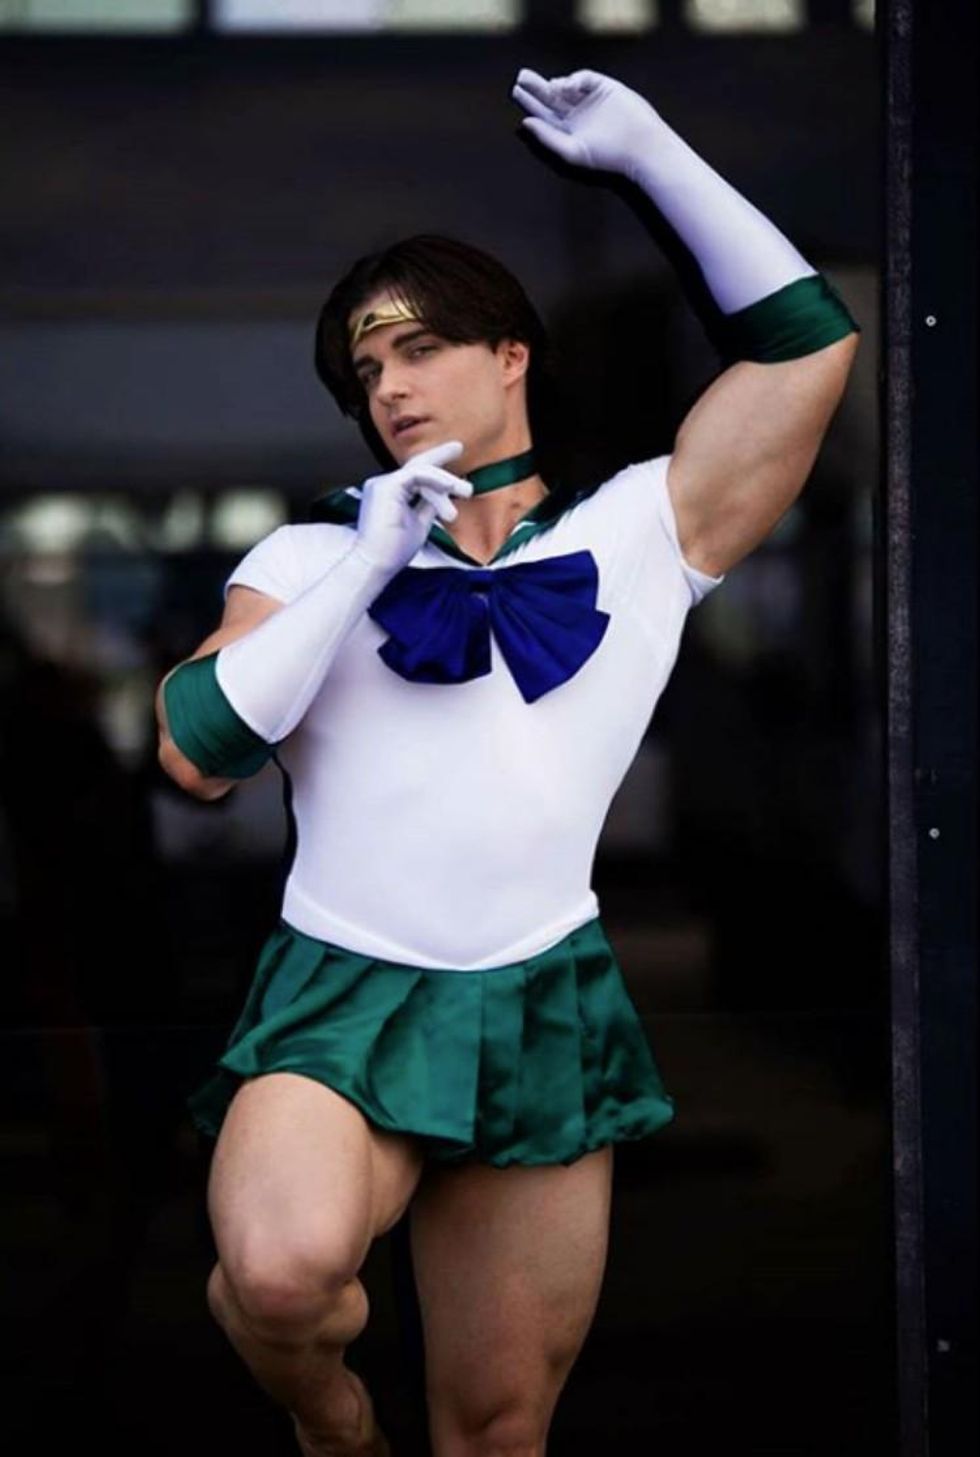 This Cosplayer Doesn't Care What Haters Think of His Sailor Neptune Look